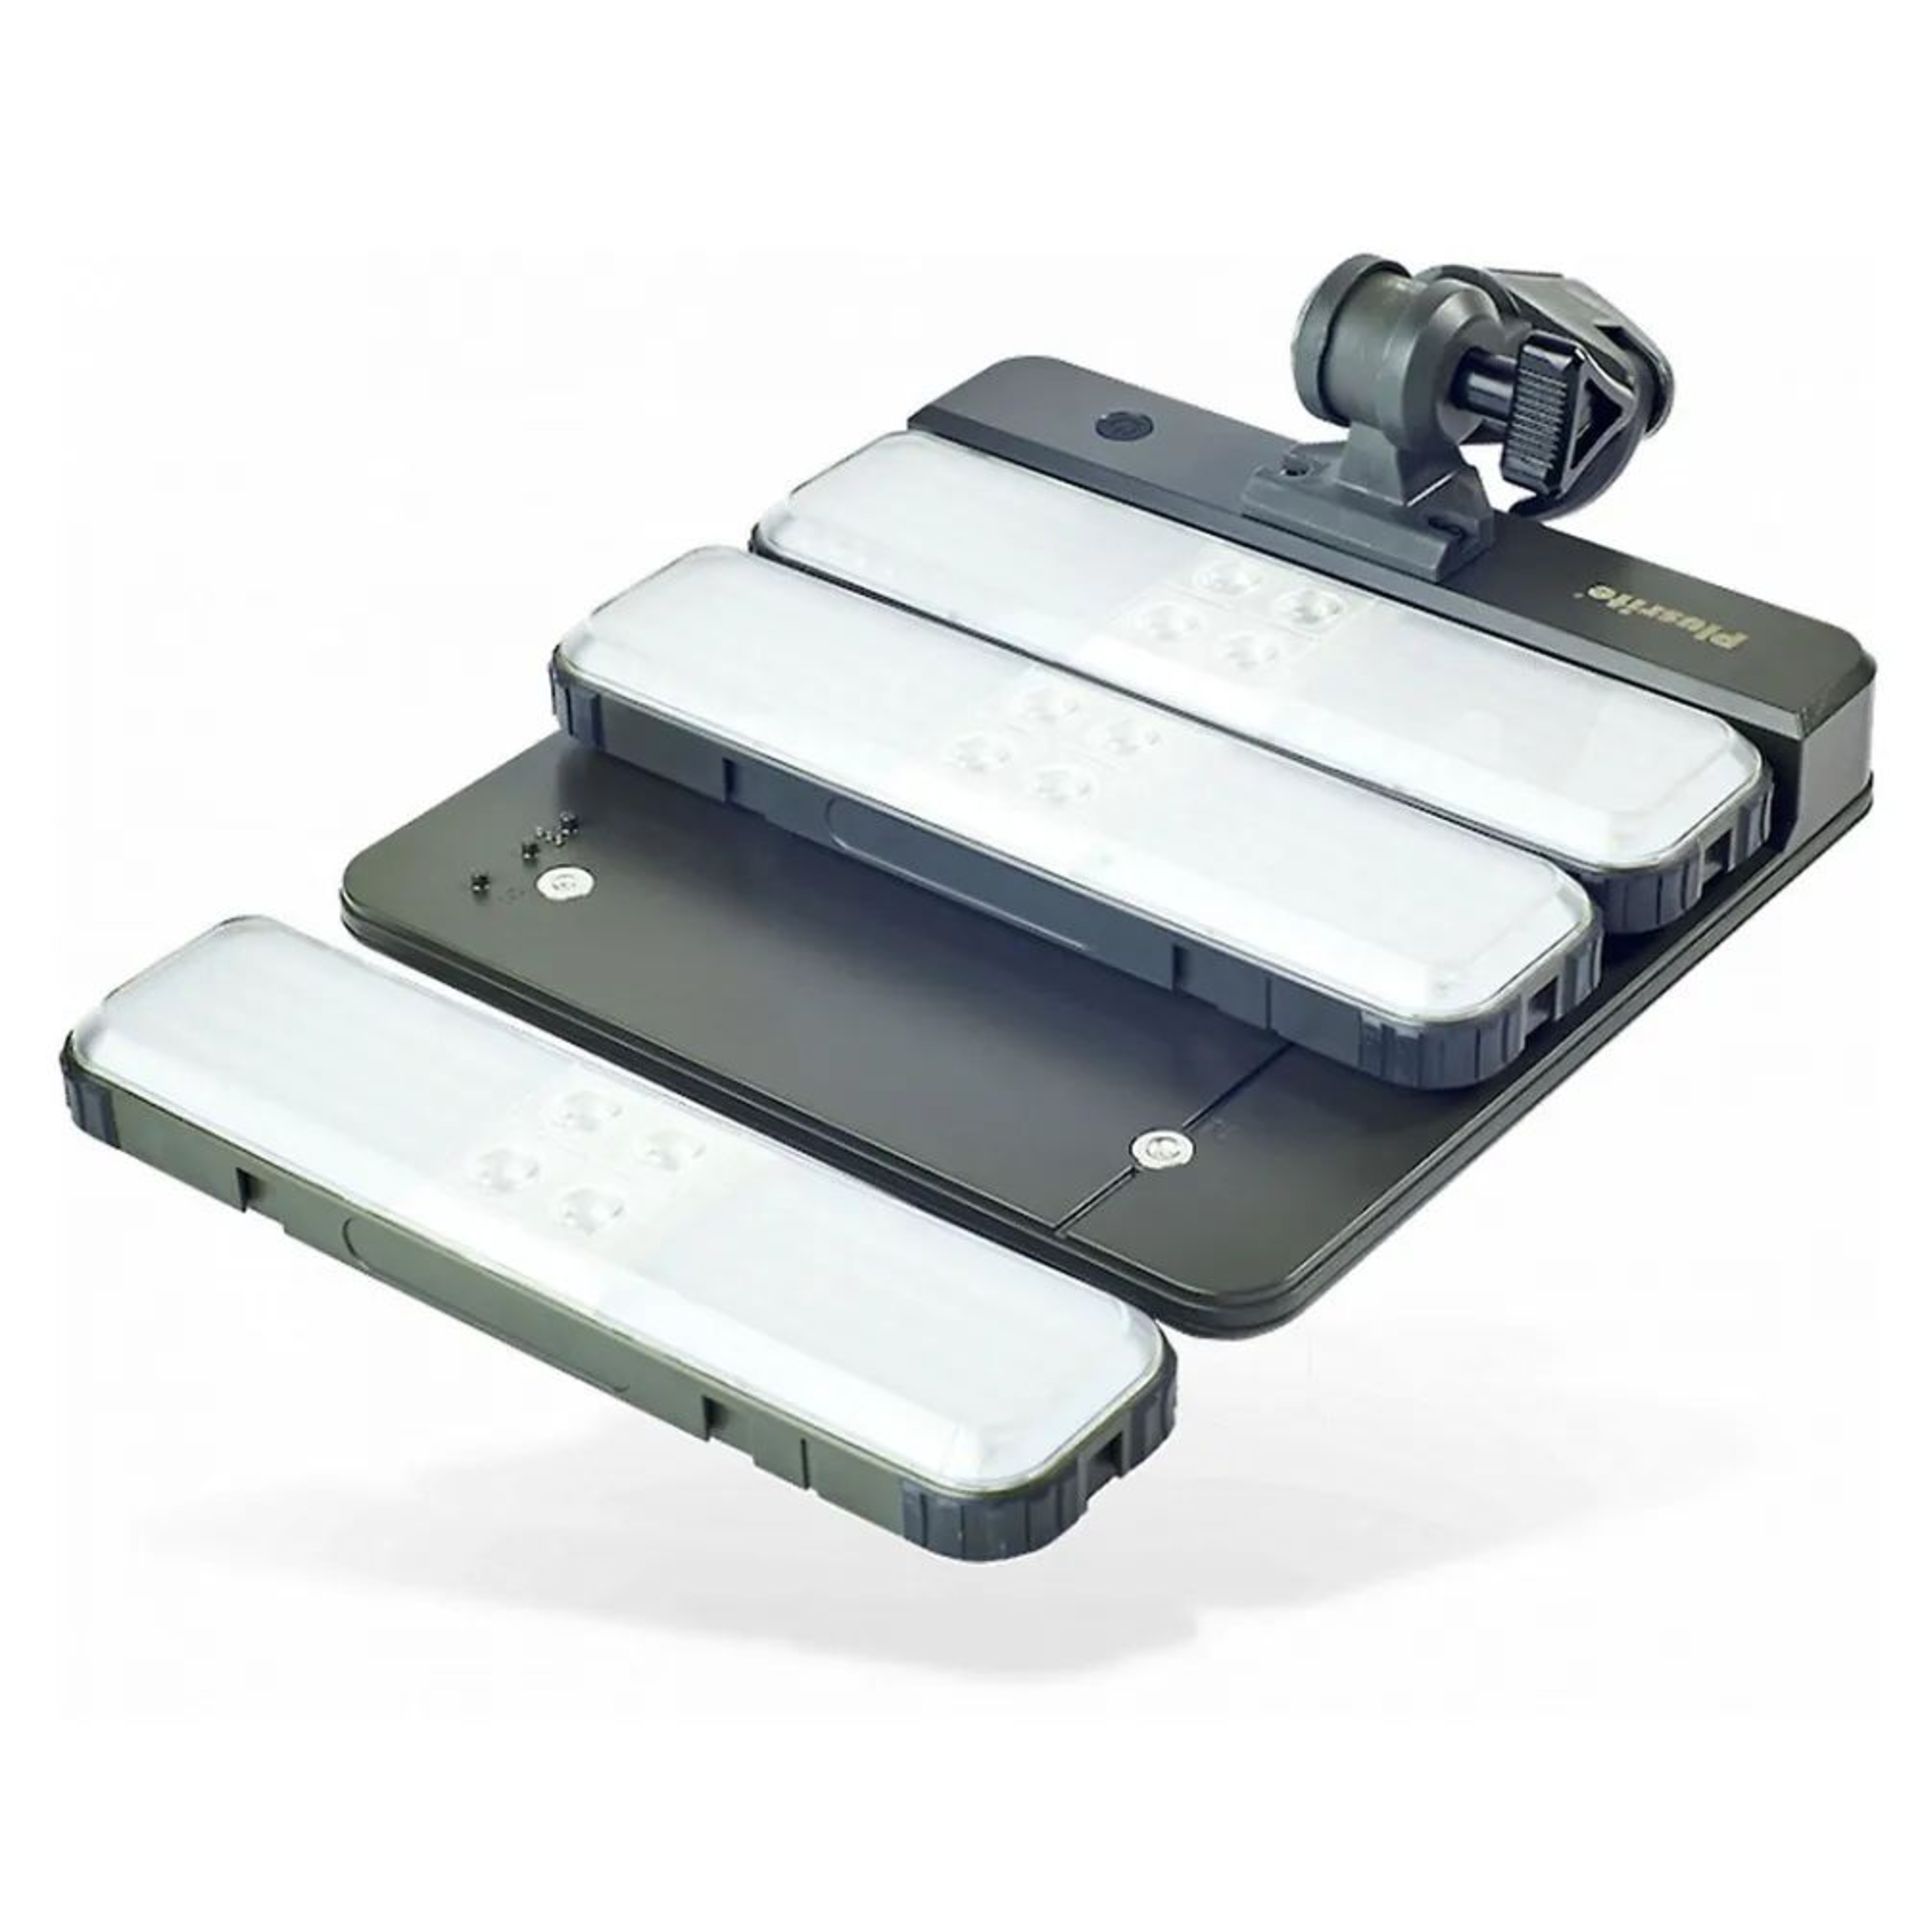 UNITS - SOLAR RECHARGEABLE LED HIGH LUMEN WORKING LIGHT / CAMPING LIGHT KIT (NEW) (MSRP $300) - Image 9 of 9